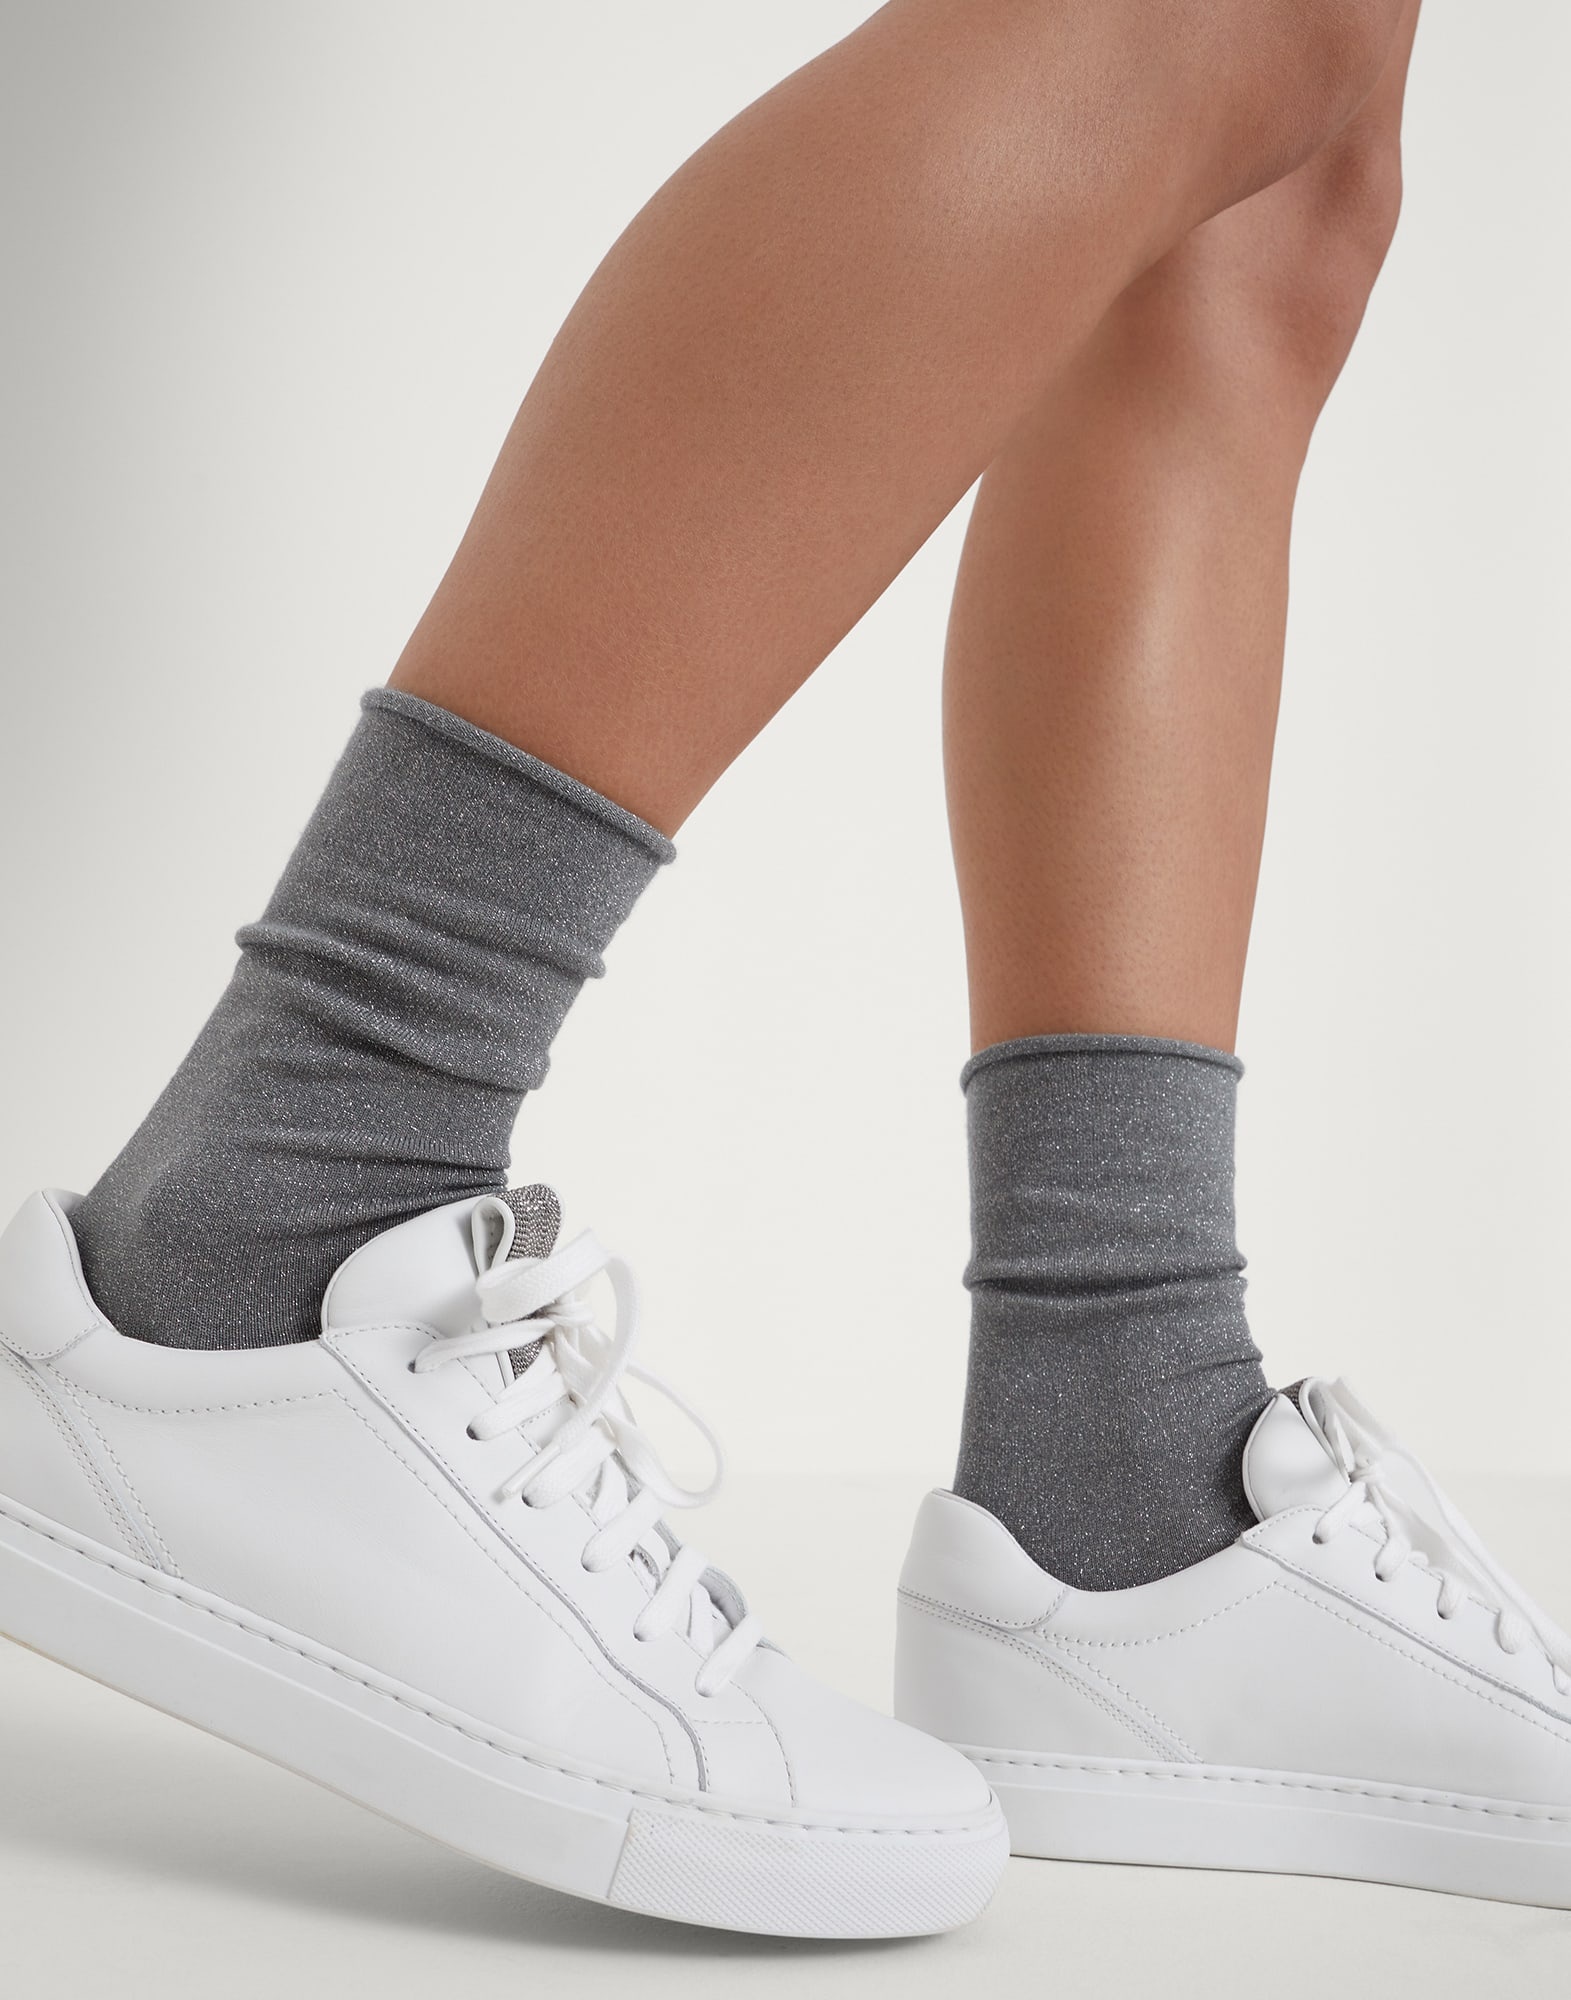 Cashmere and silk sparkling knit socks - 3